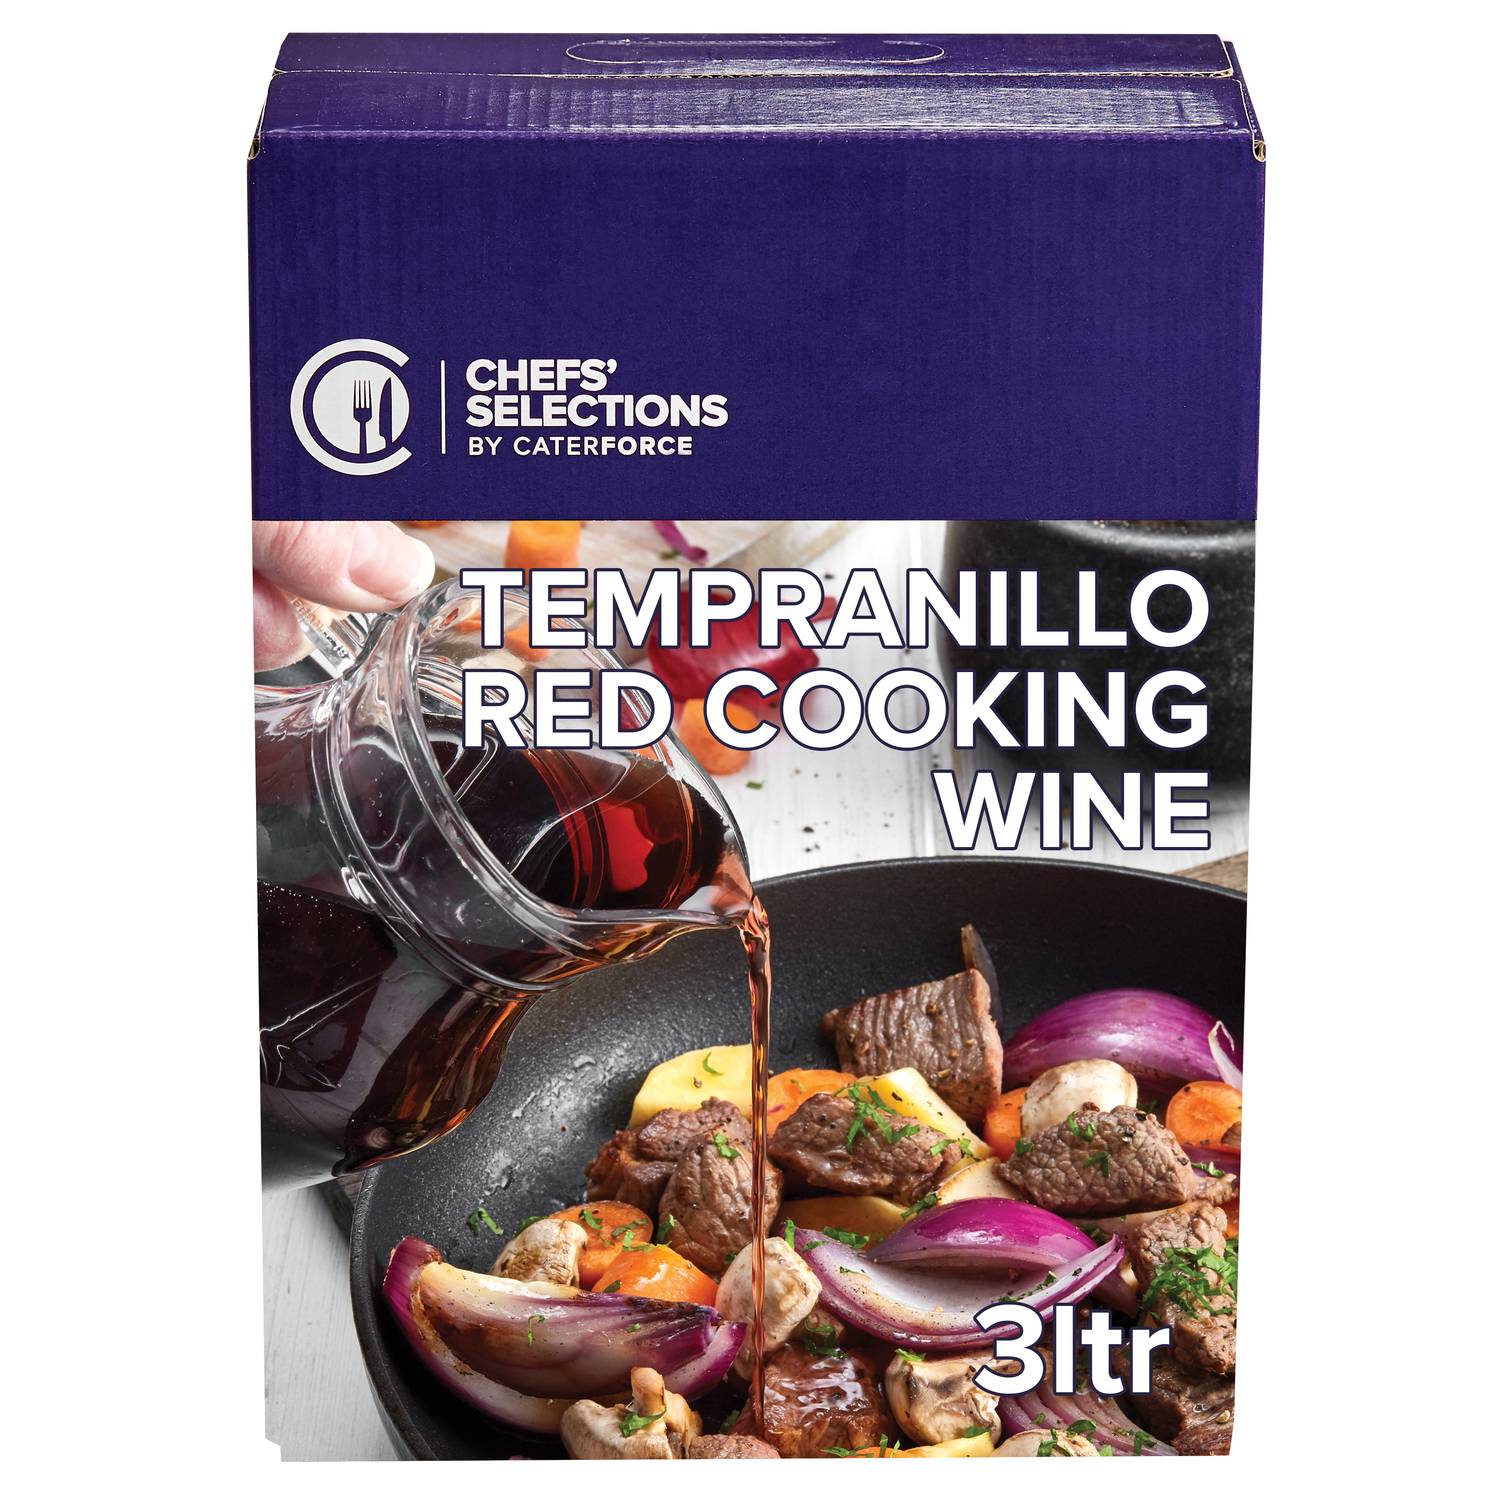 Chefs’ Selections Tempranillo Red Cooking Wine BIB (4 x 3L)